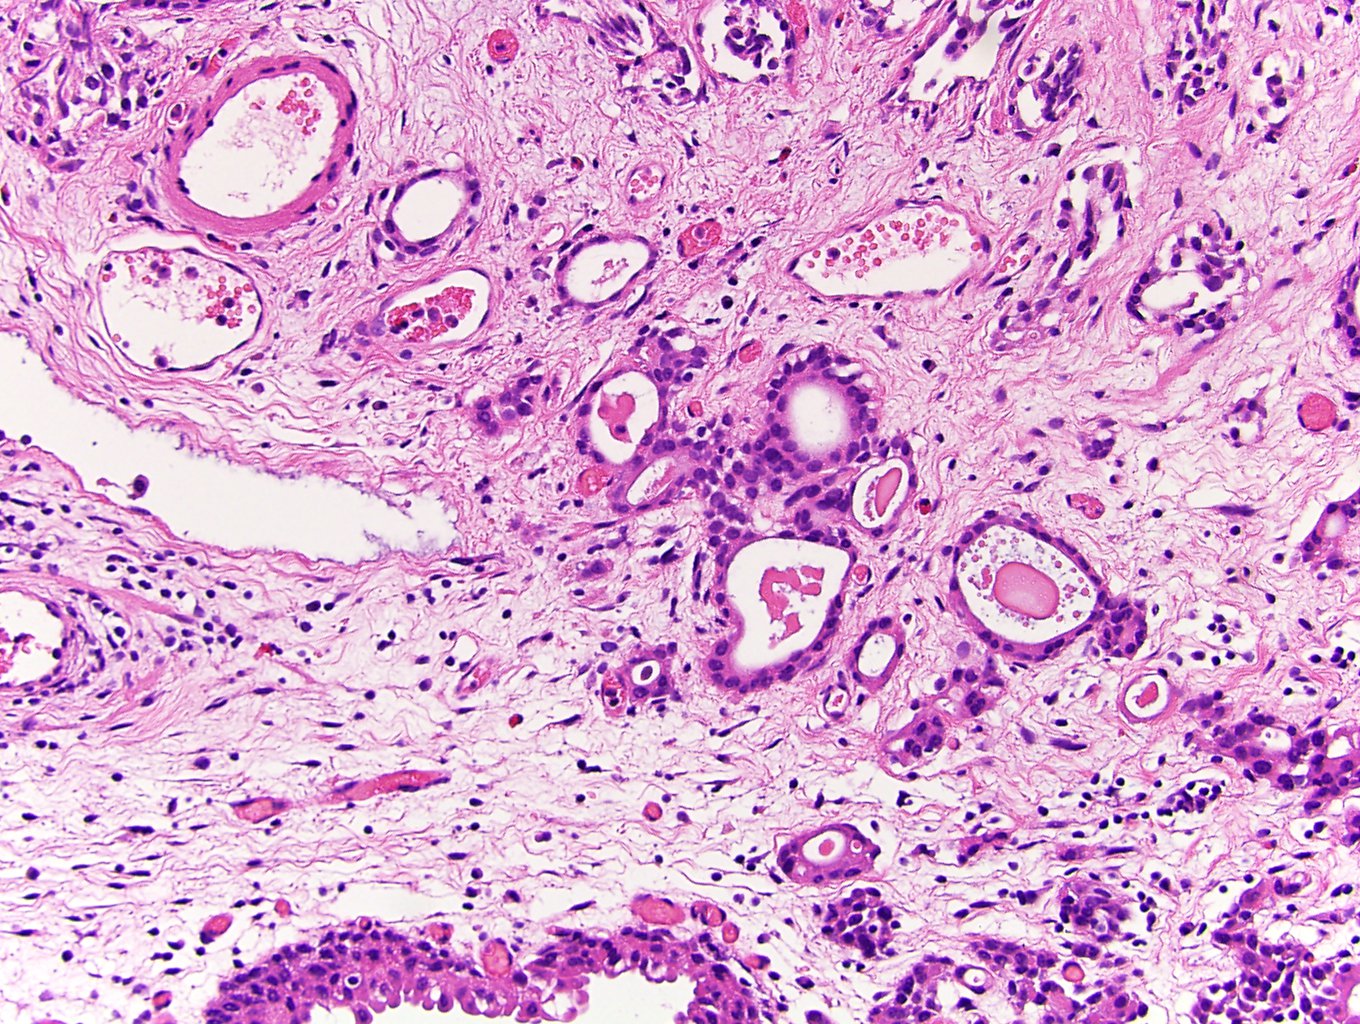 Microcysts, macrocysts and tubules